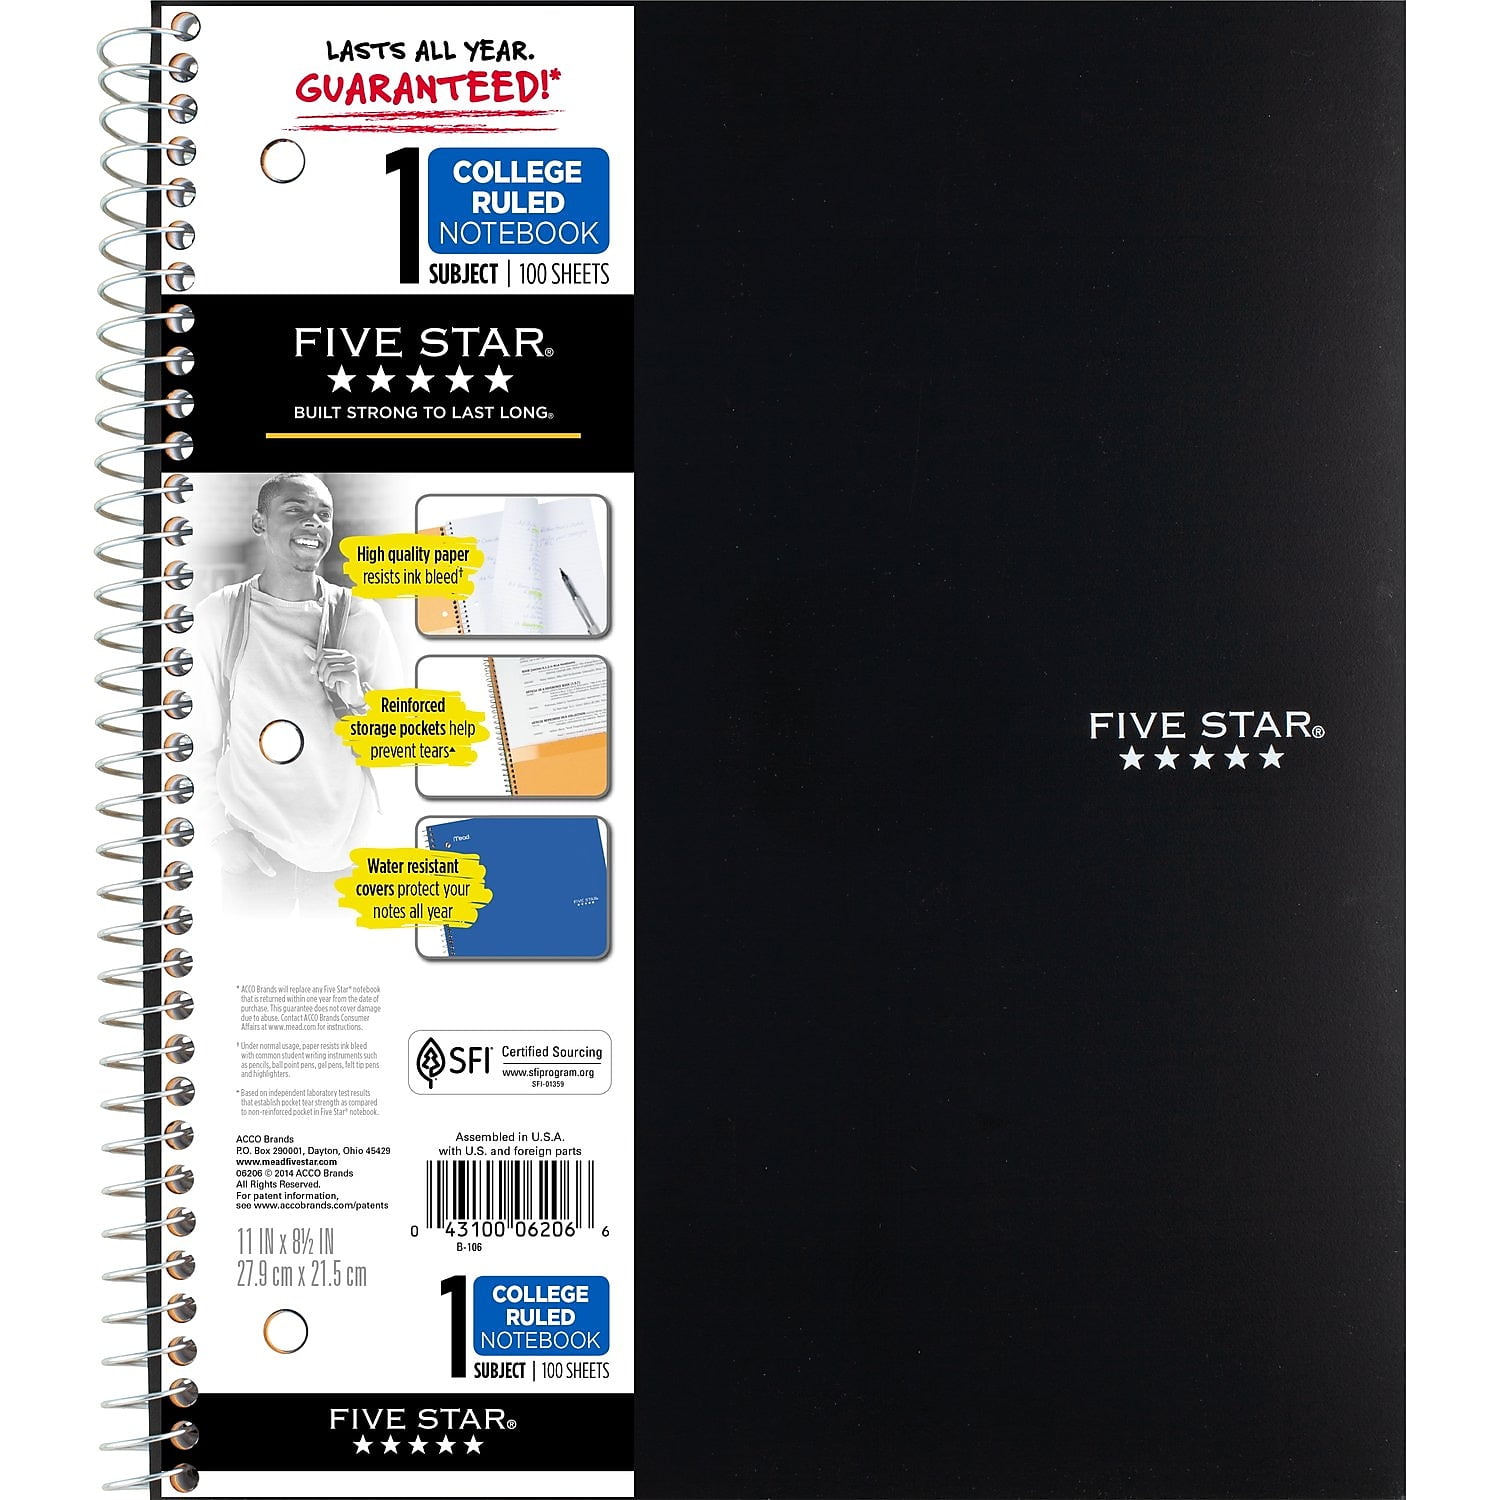 Oxford® 5-Subject Notebook, 8-1/2